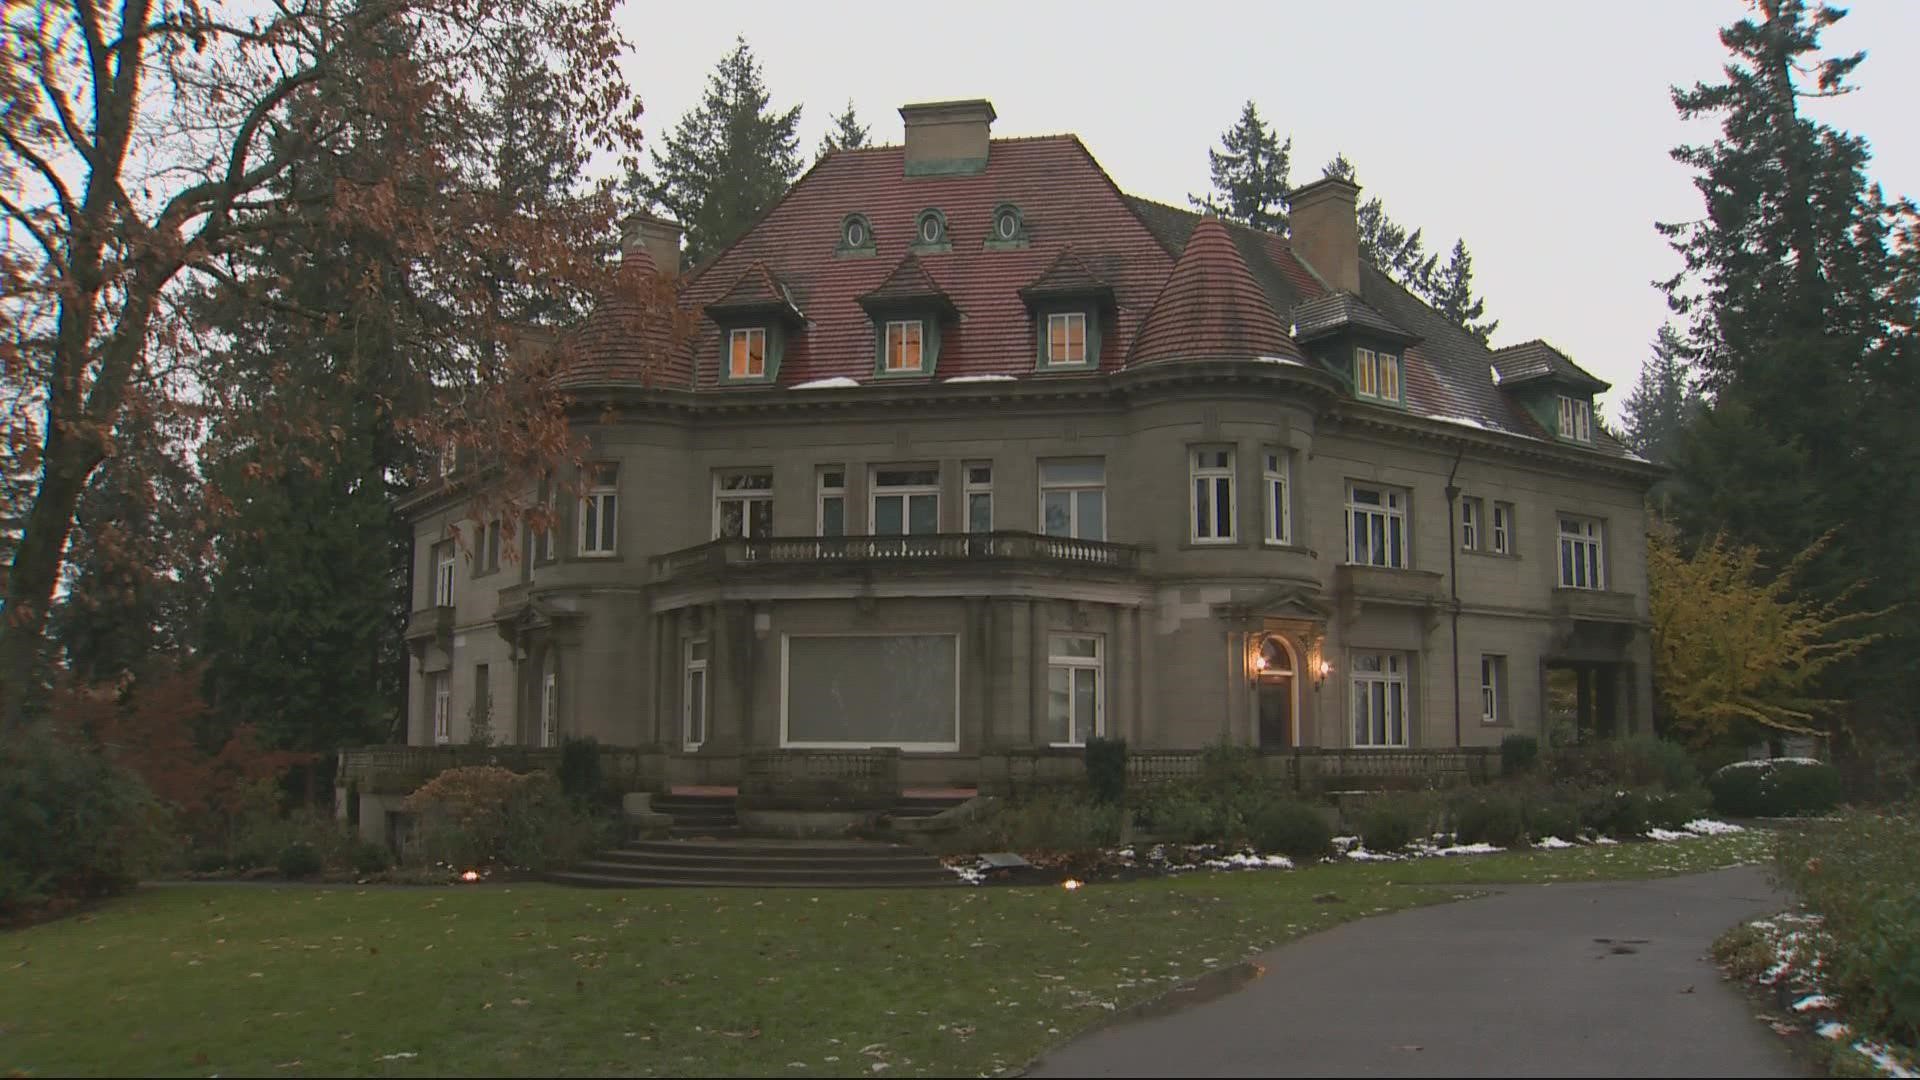 Pittock Mansion Society hopes to increase visitor engagement, programming and revenue in the new year.